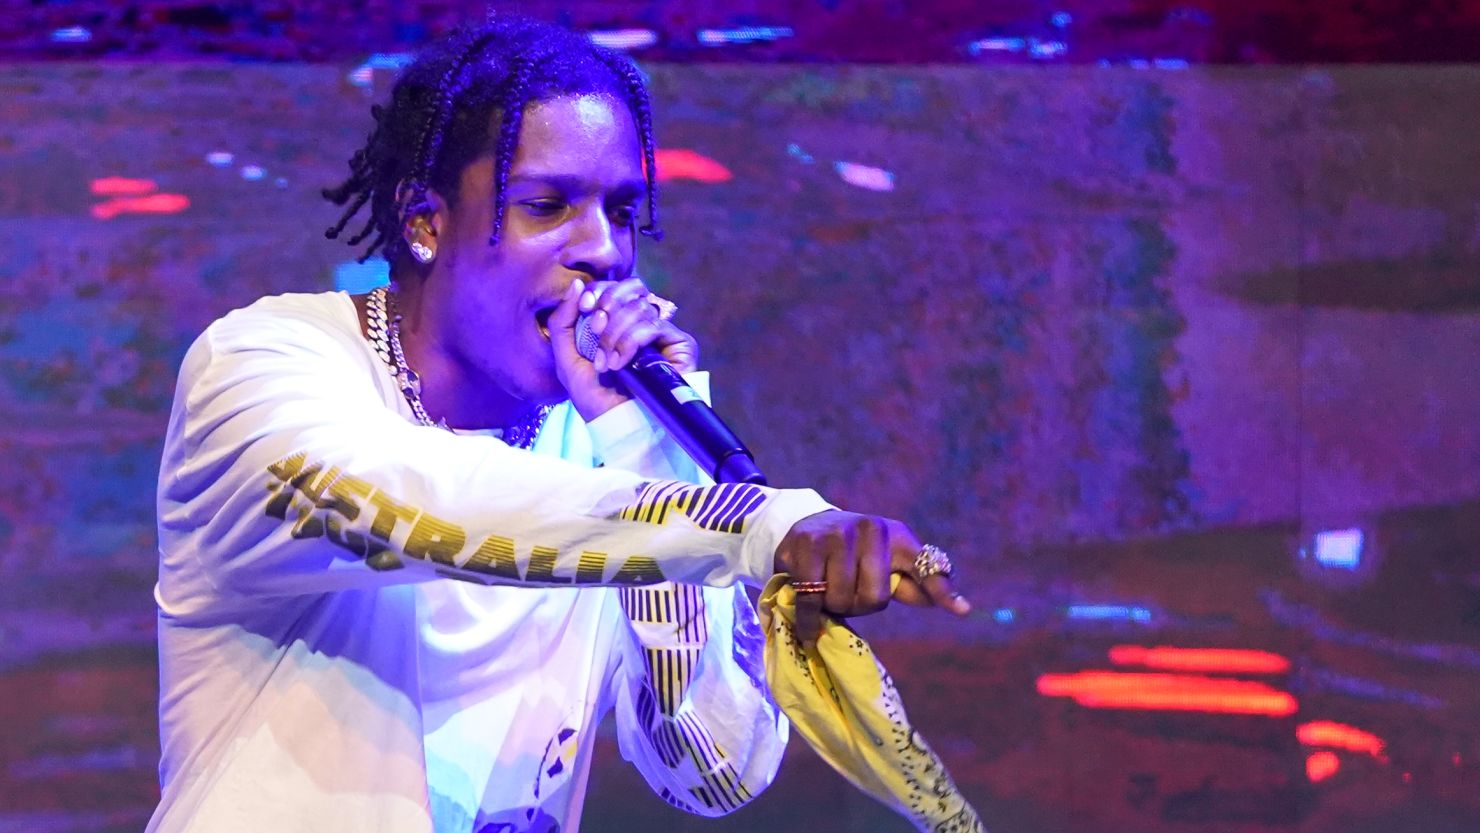 A lawyer representing A$AP Rocky said his client denies any wrongdoing.